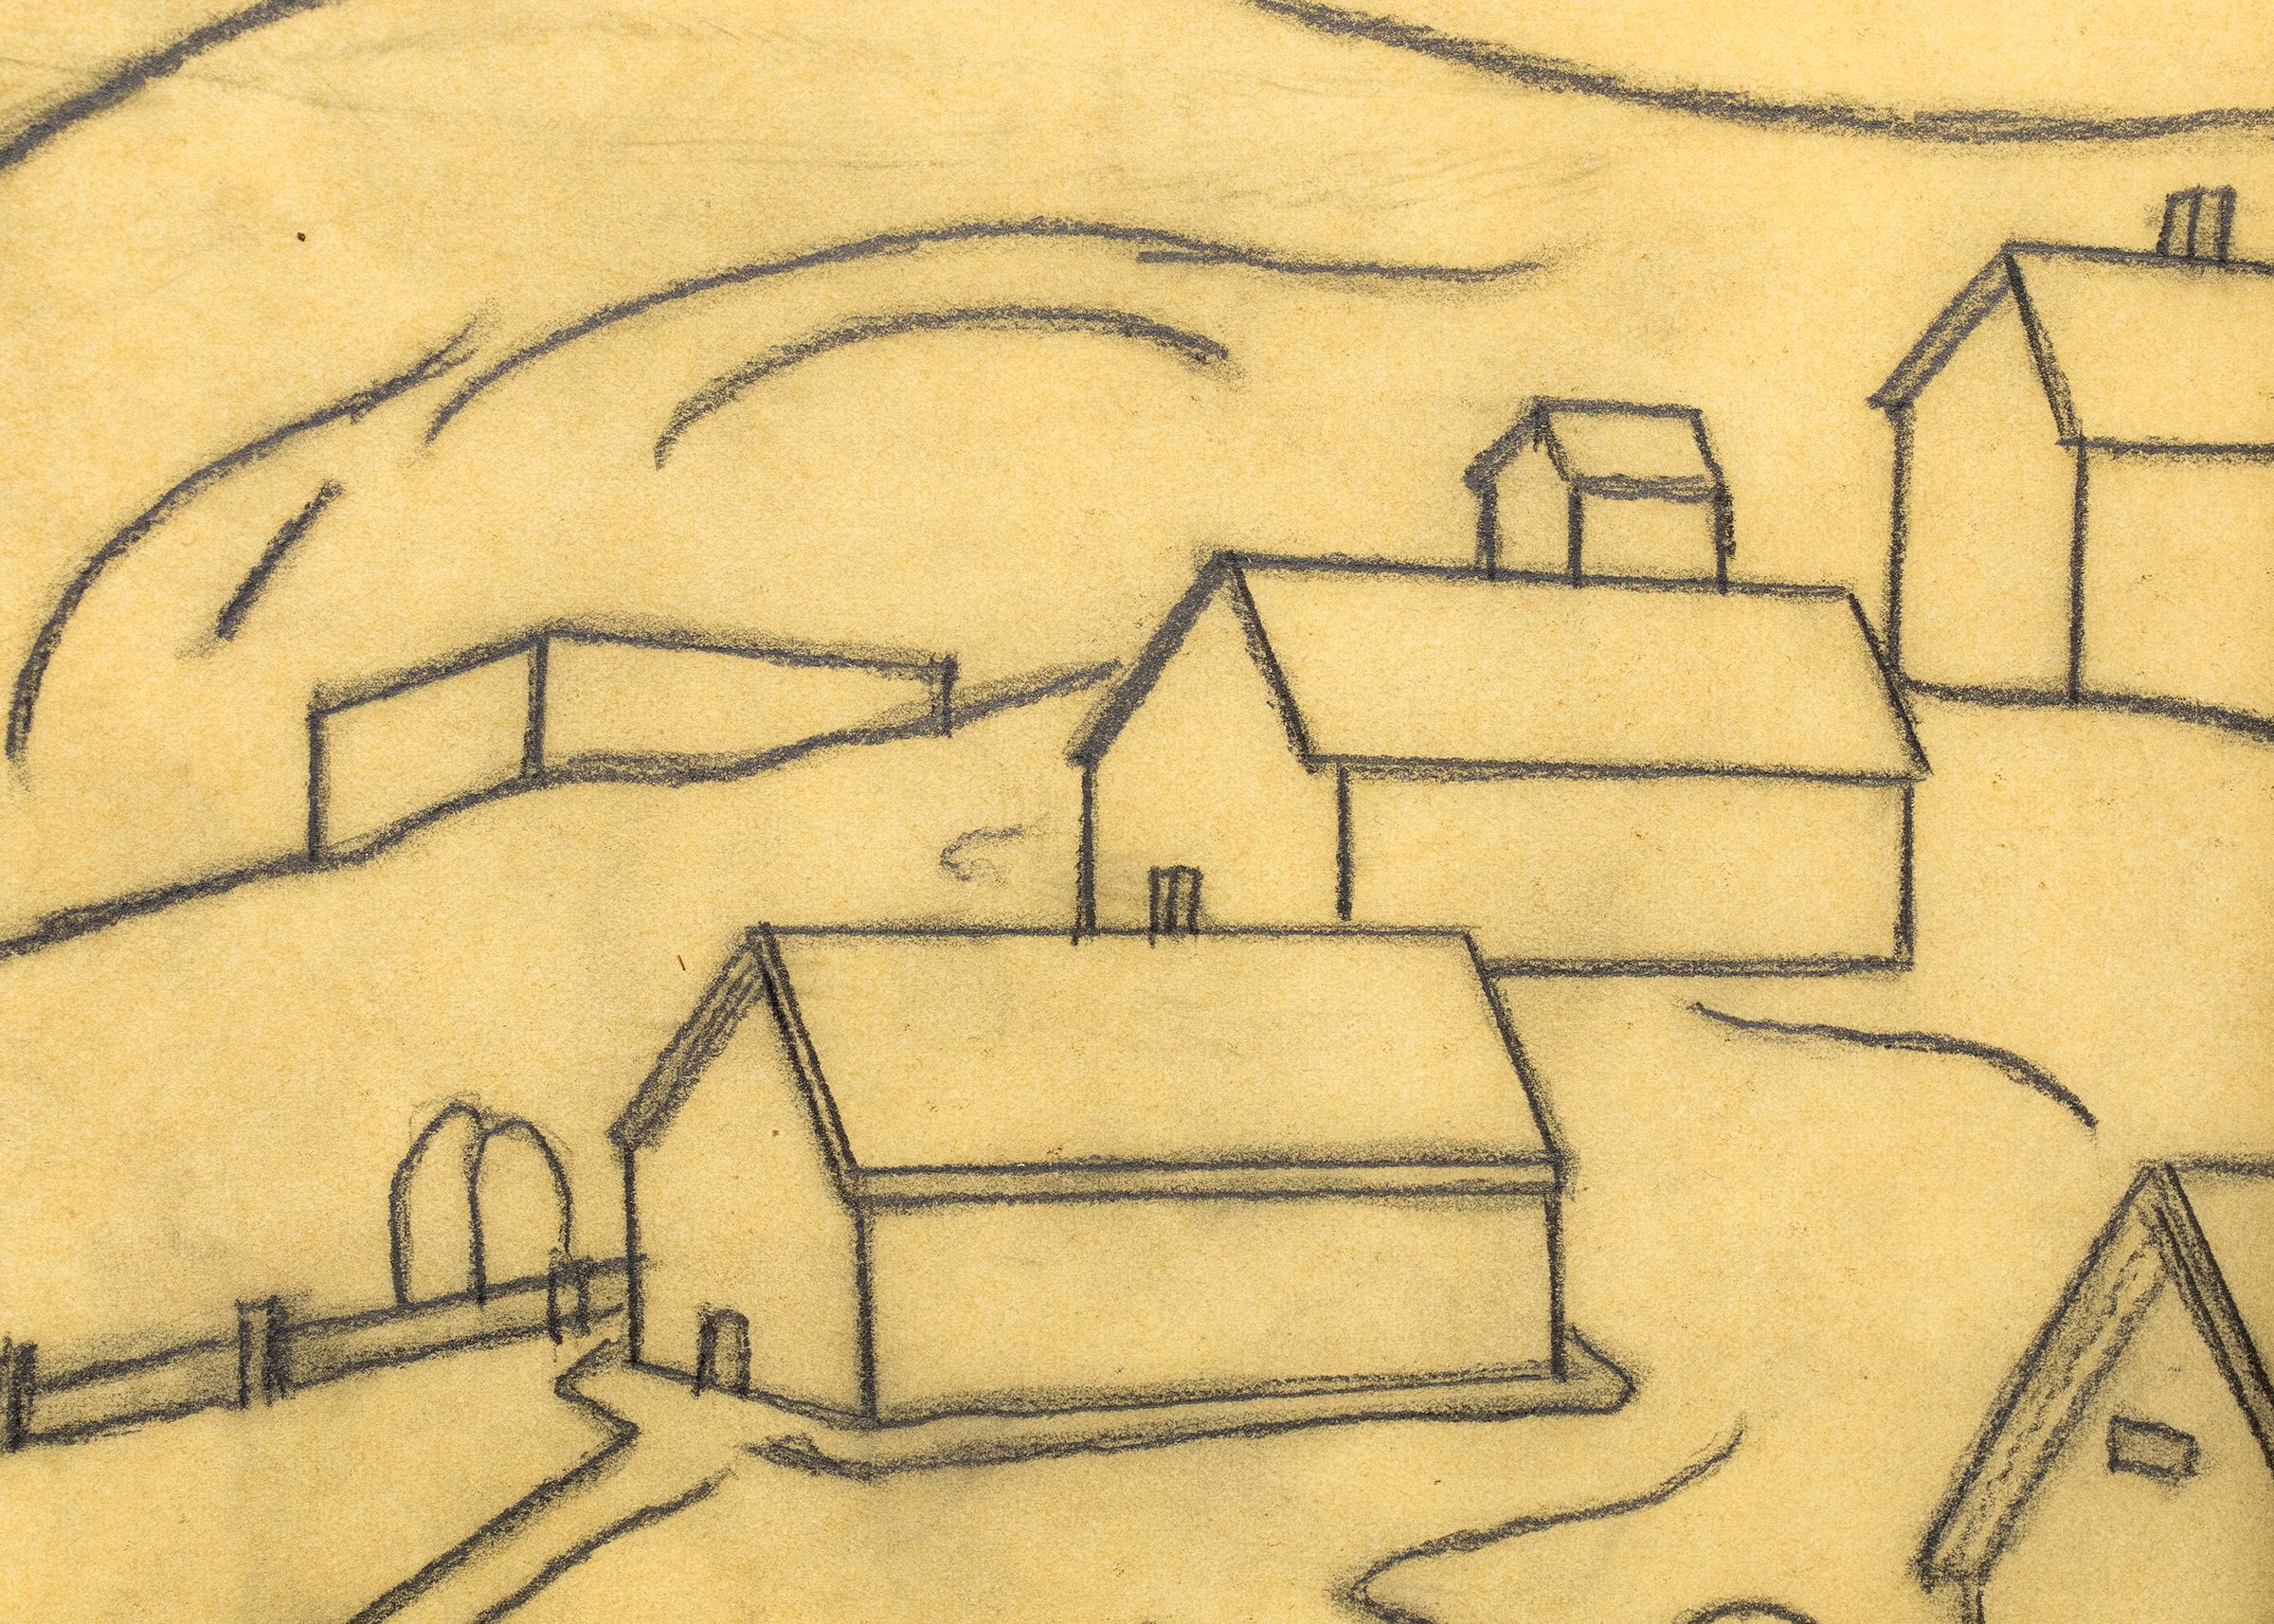 Graphite on paper drawing of houses on a hill by Charles Ragland Bunnell (1897-1968) circa 1935. Presented in a custom hardwood frame with all archival materials and UV protectant glass; outer dimensions measure 21 x 21 ½ x ½ inches. Image size is